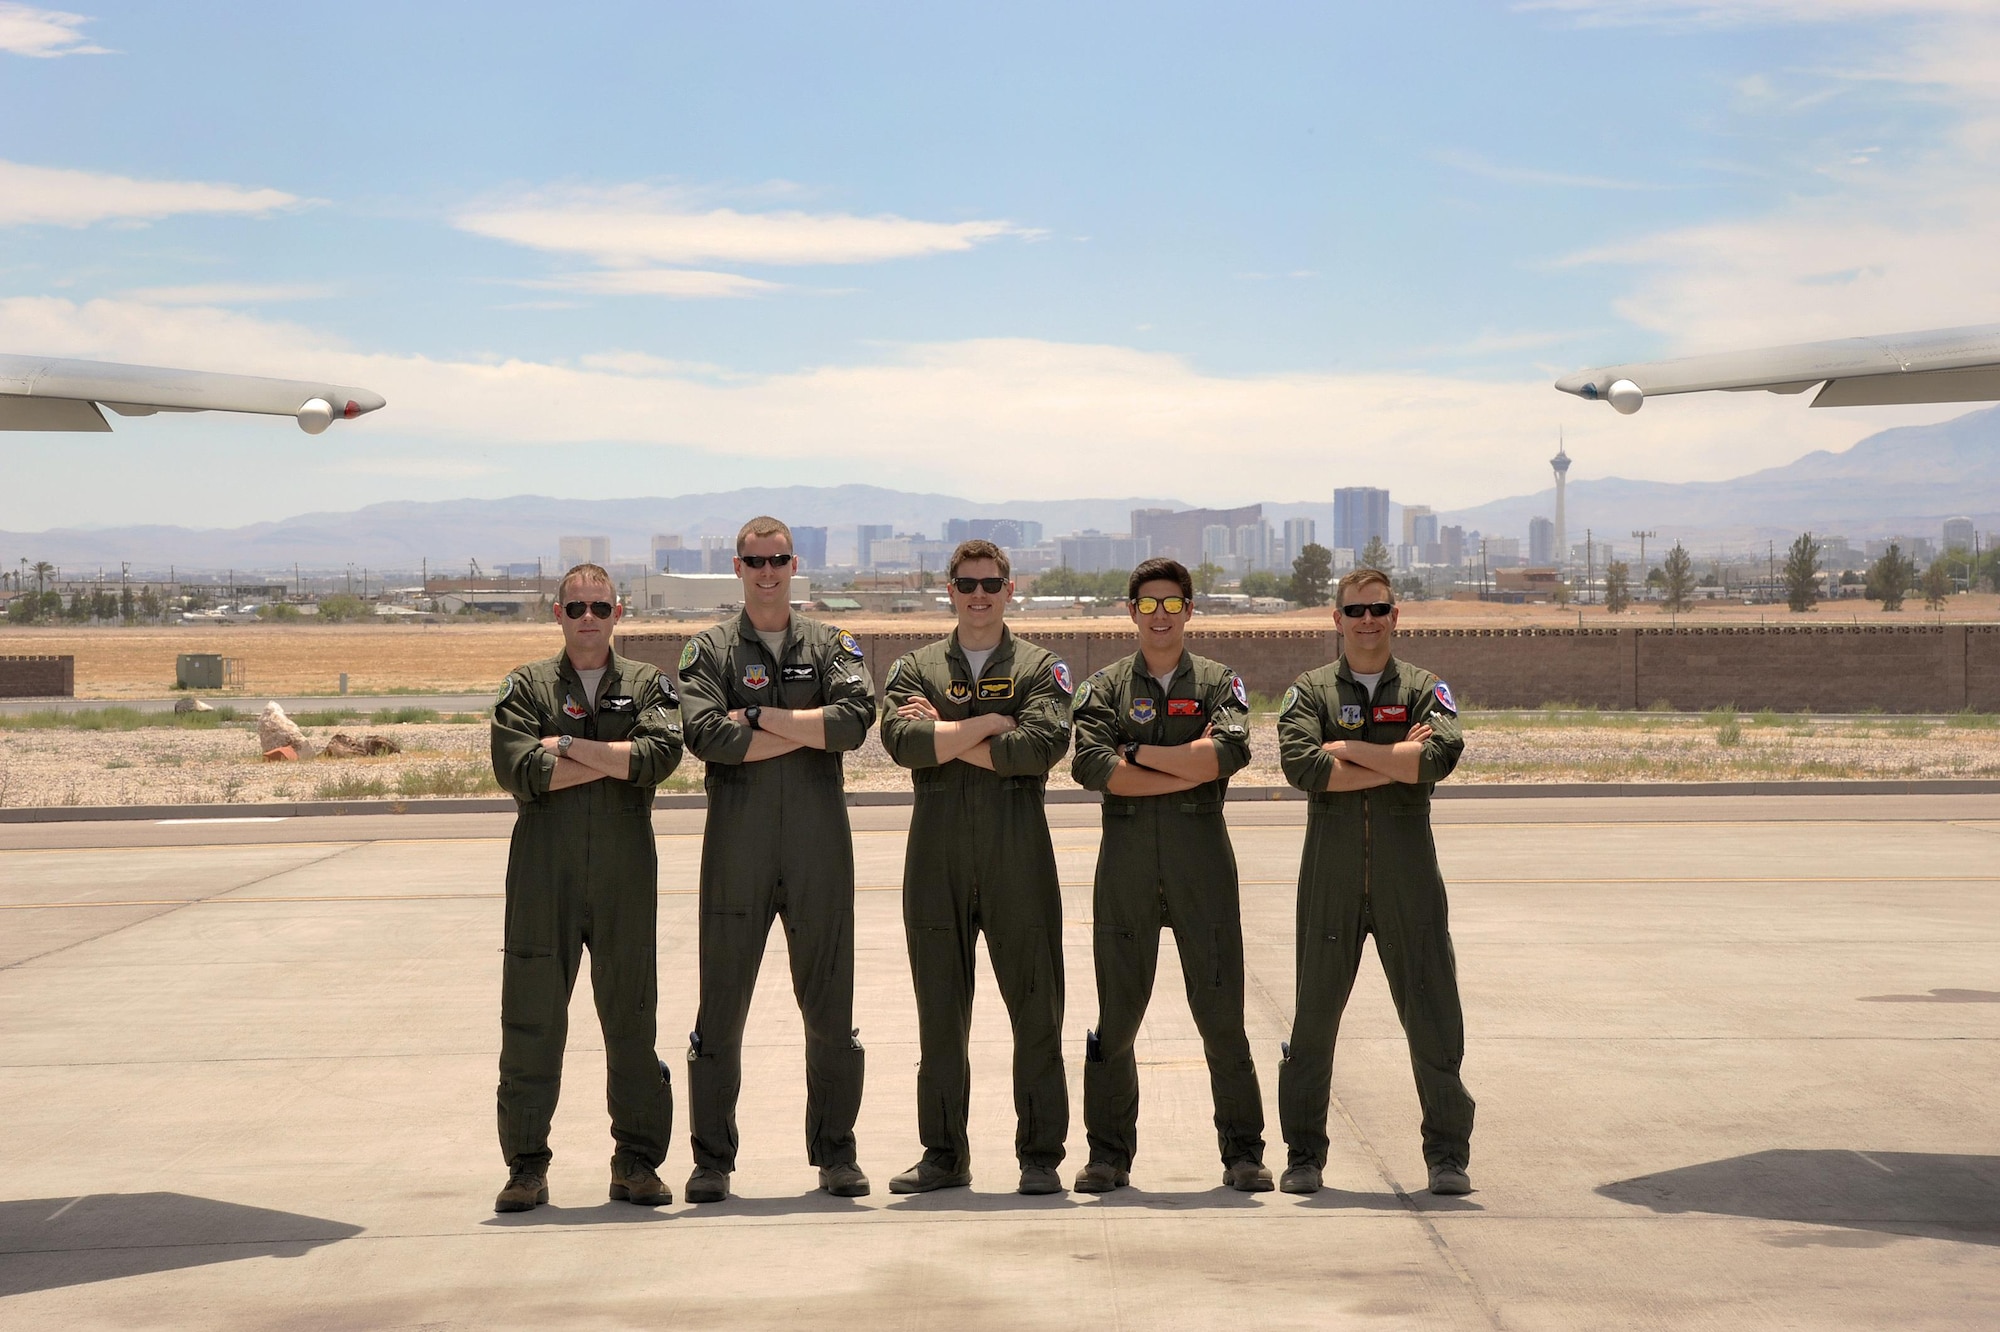 U.S. Air Force fighter pilots completing their 6-month course at Nellis Air Force Base, Nev., (from left to right) Maj. Kevin Danaher, Capt. Ryan Sivertsen, Capt. Matt Tanis, Capt. Nathan Liptak, and 142nd Fighter Wing Maj. Bradley Young, pause for a group photograph, June 10, 2017. (U.S. Air National Guard photo by Master Sgt. John Hughel, 142nd Fighter Wing Public Affairs)